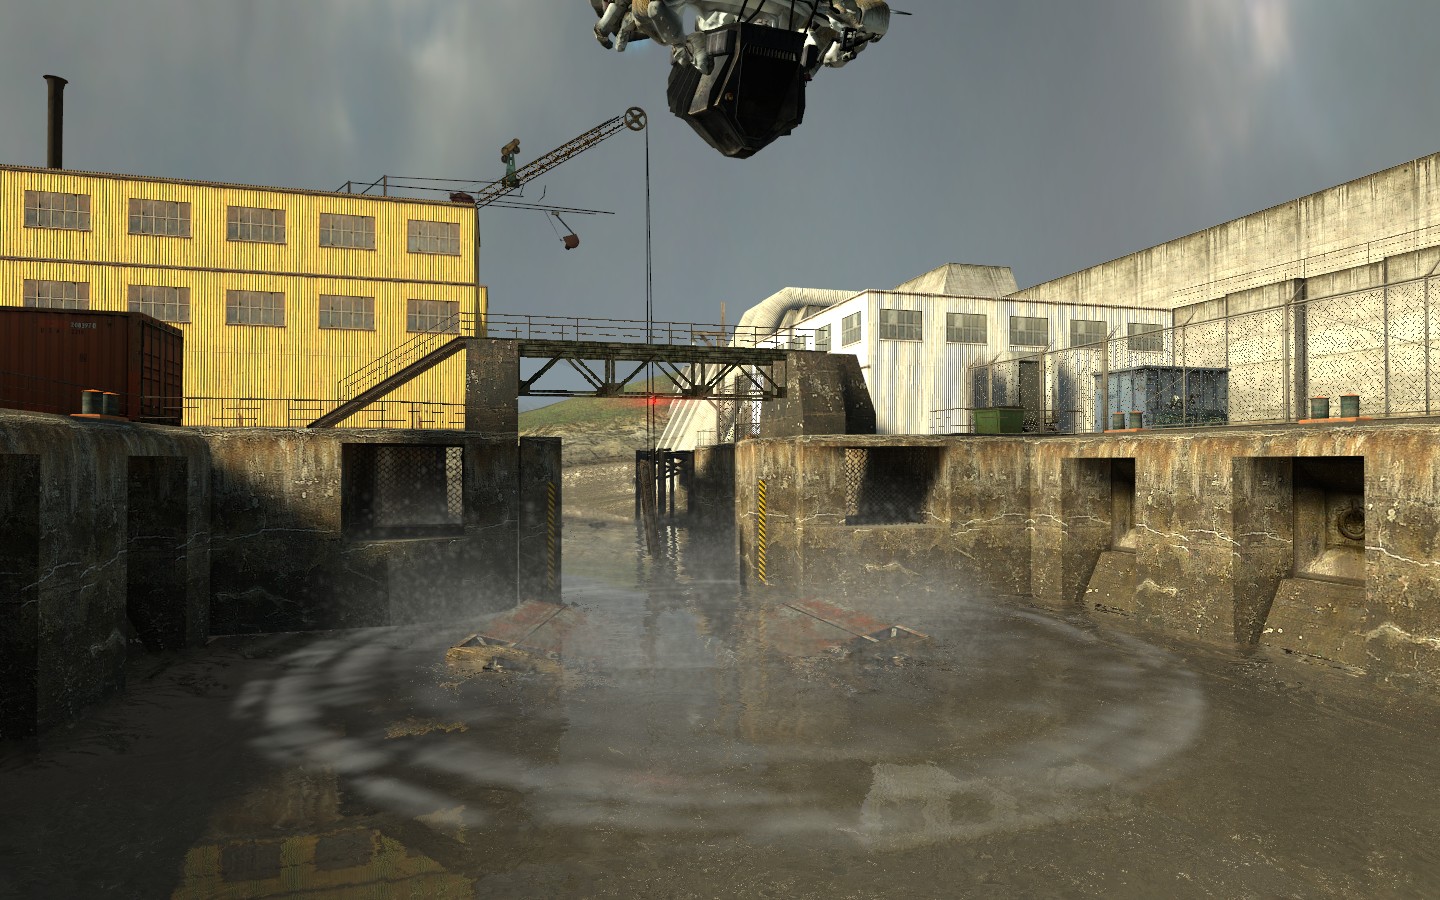 image-d1-canals-070021-jpg-half-life-wiki-fandom-powered-by-wikia